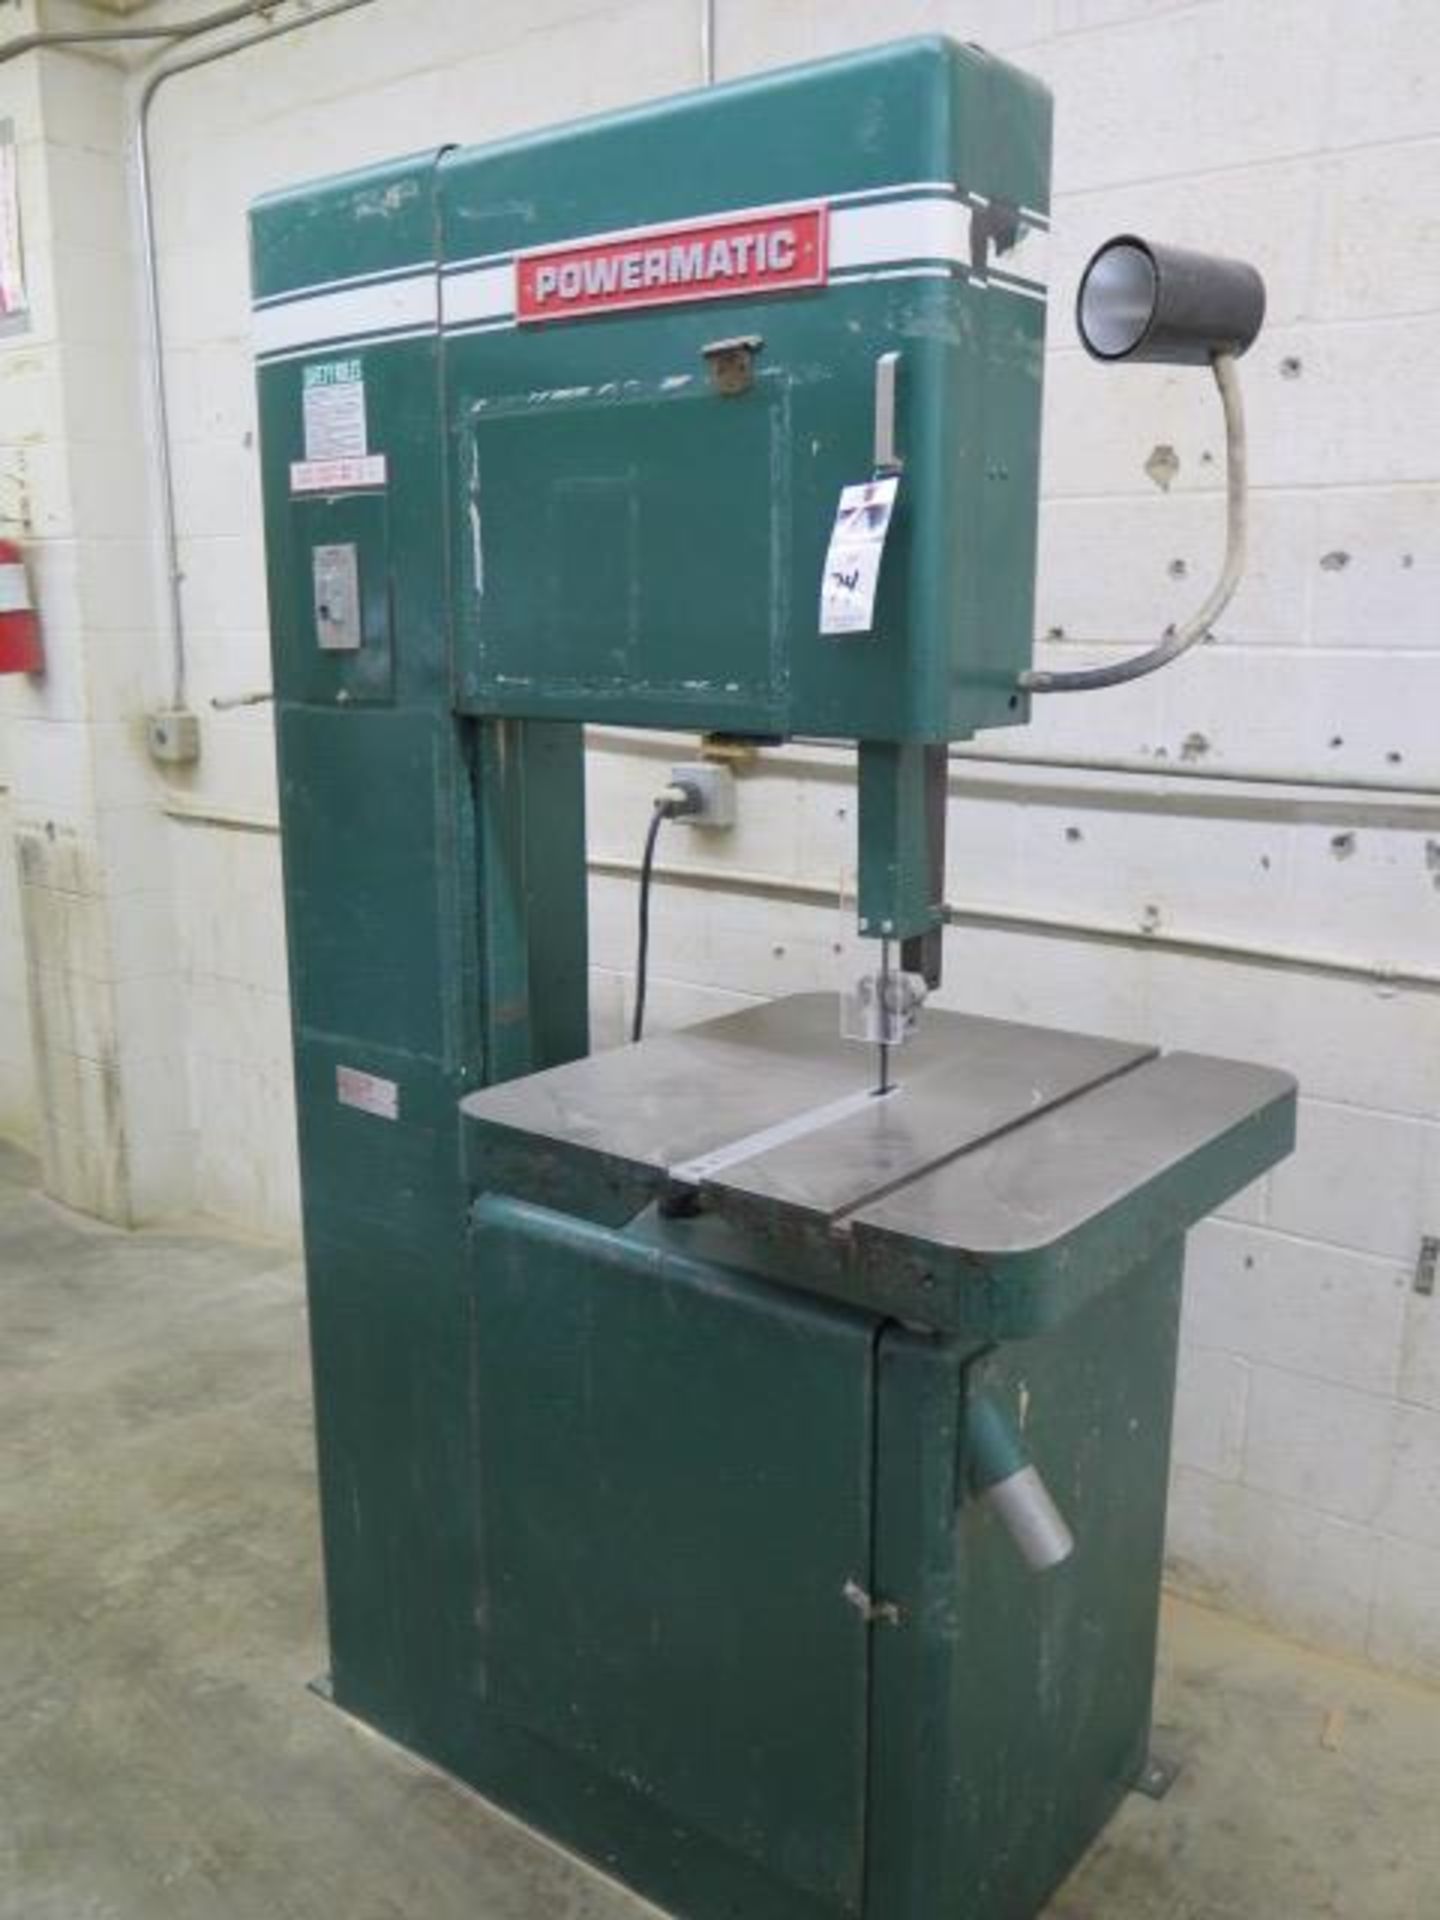 Powermatic mdl. 81 20” Vertical Band Saw s/n 8181191 w/ 24” x 24” Miter Table (SOLD AS-IS - NO - Image 2 of 4